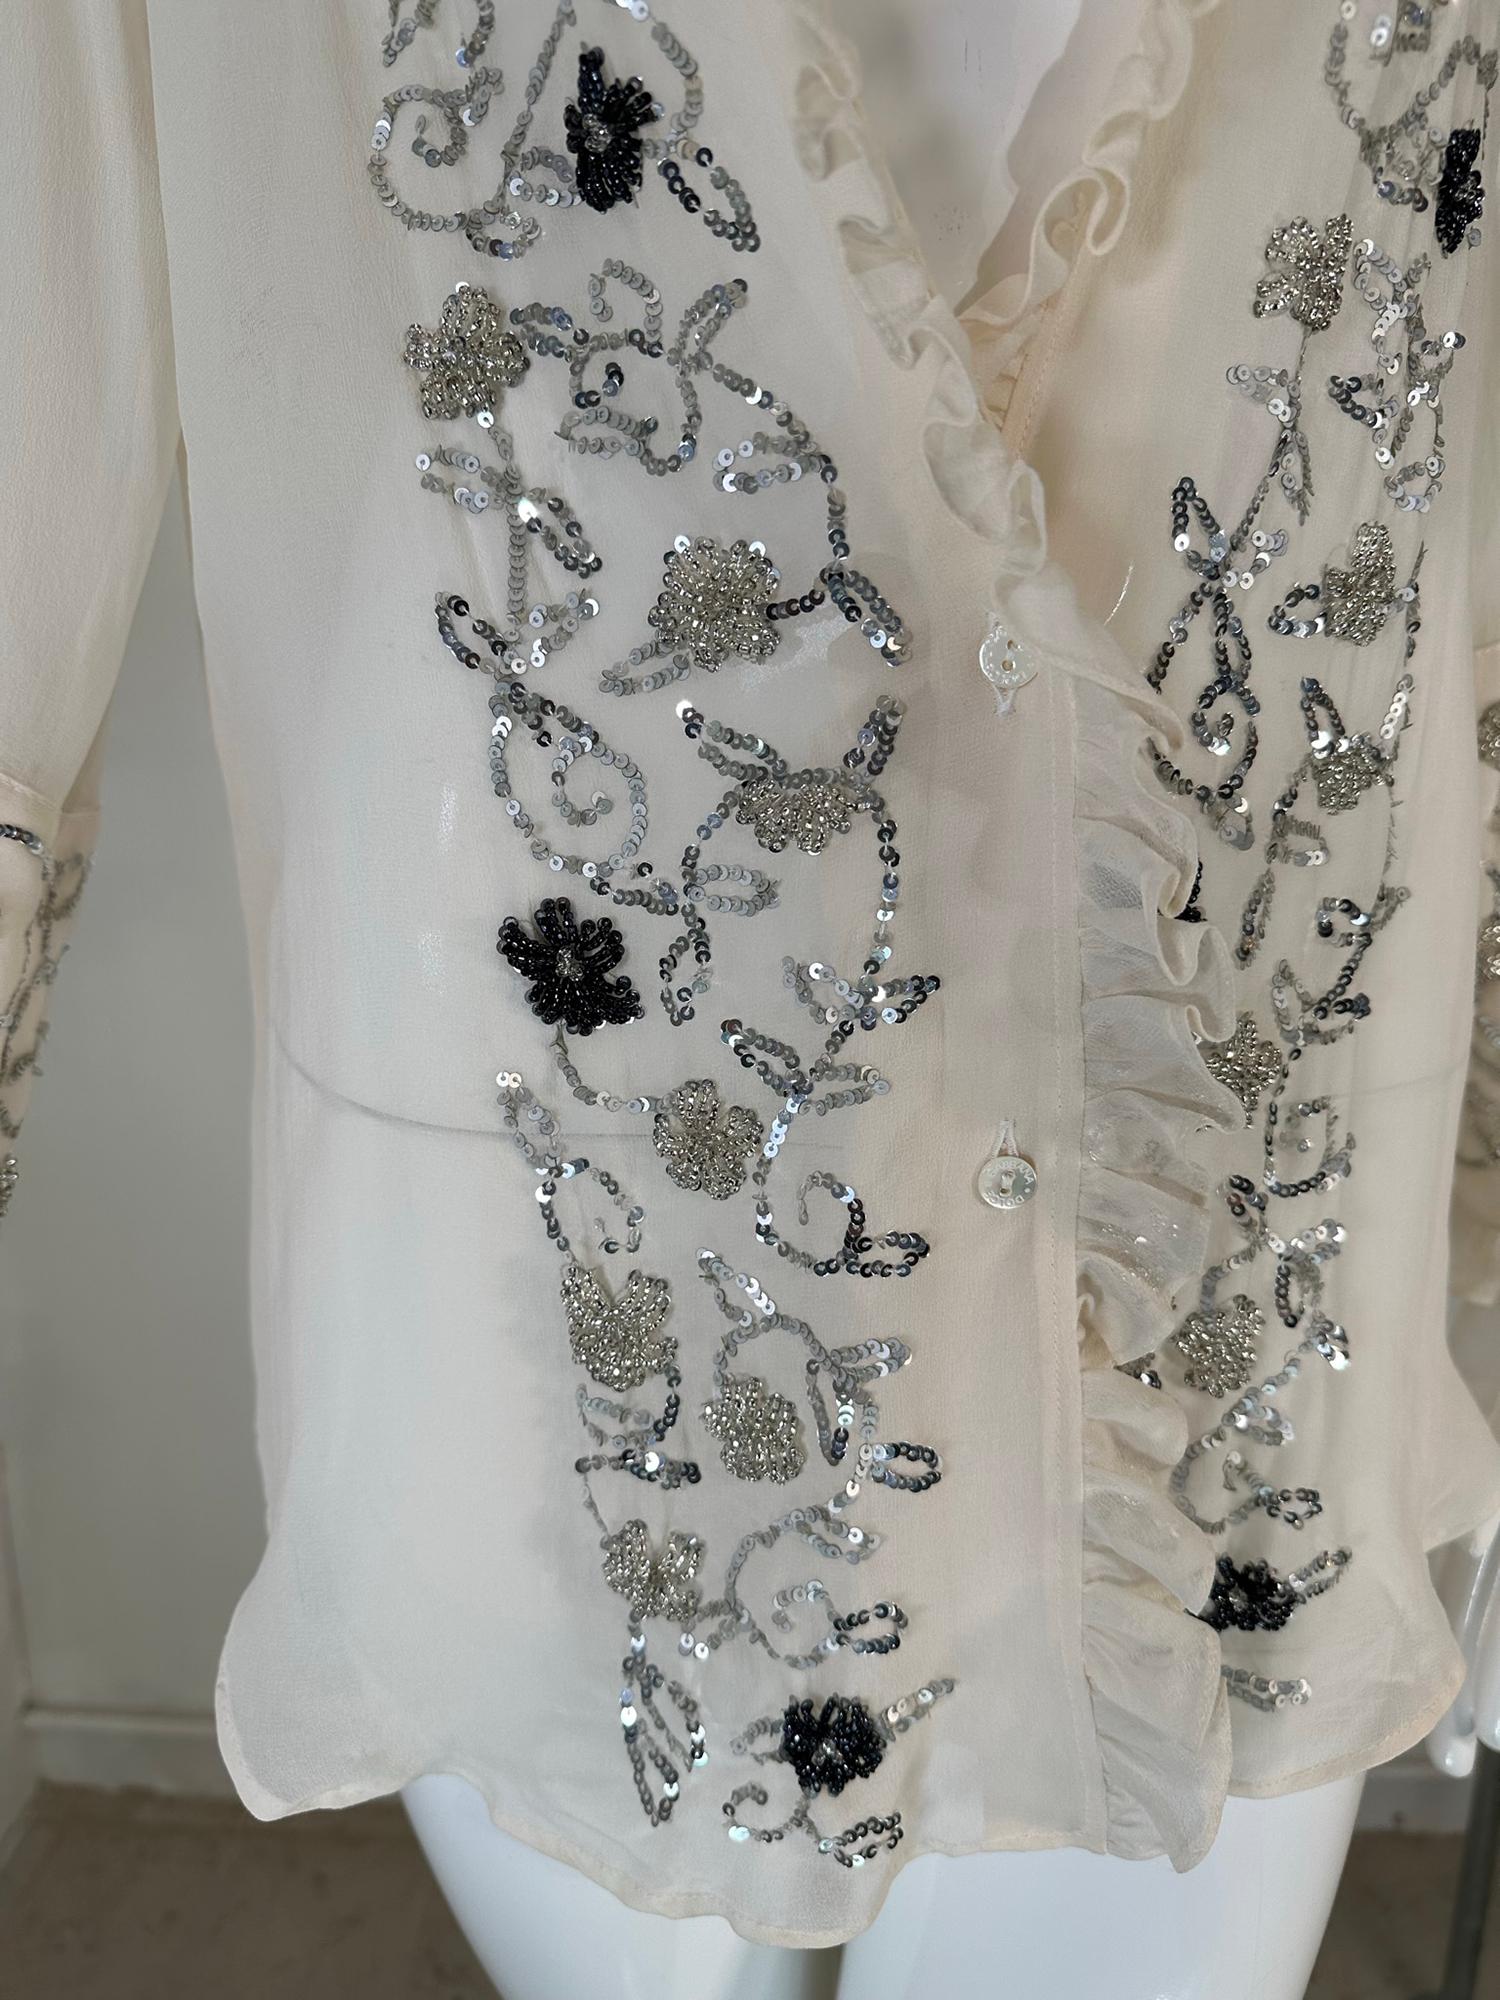 Dolce & Gabbana off white sheer silk chiffon plunge neck glittery sequin blouse 44. Sheer silk chiffon blouse with deep plunge neckline that is outlined with narrow ruffles & a wing collar. The long sleeves have deep cuffs with ruffle edges & sequin